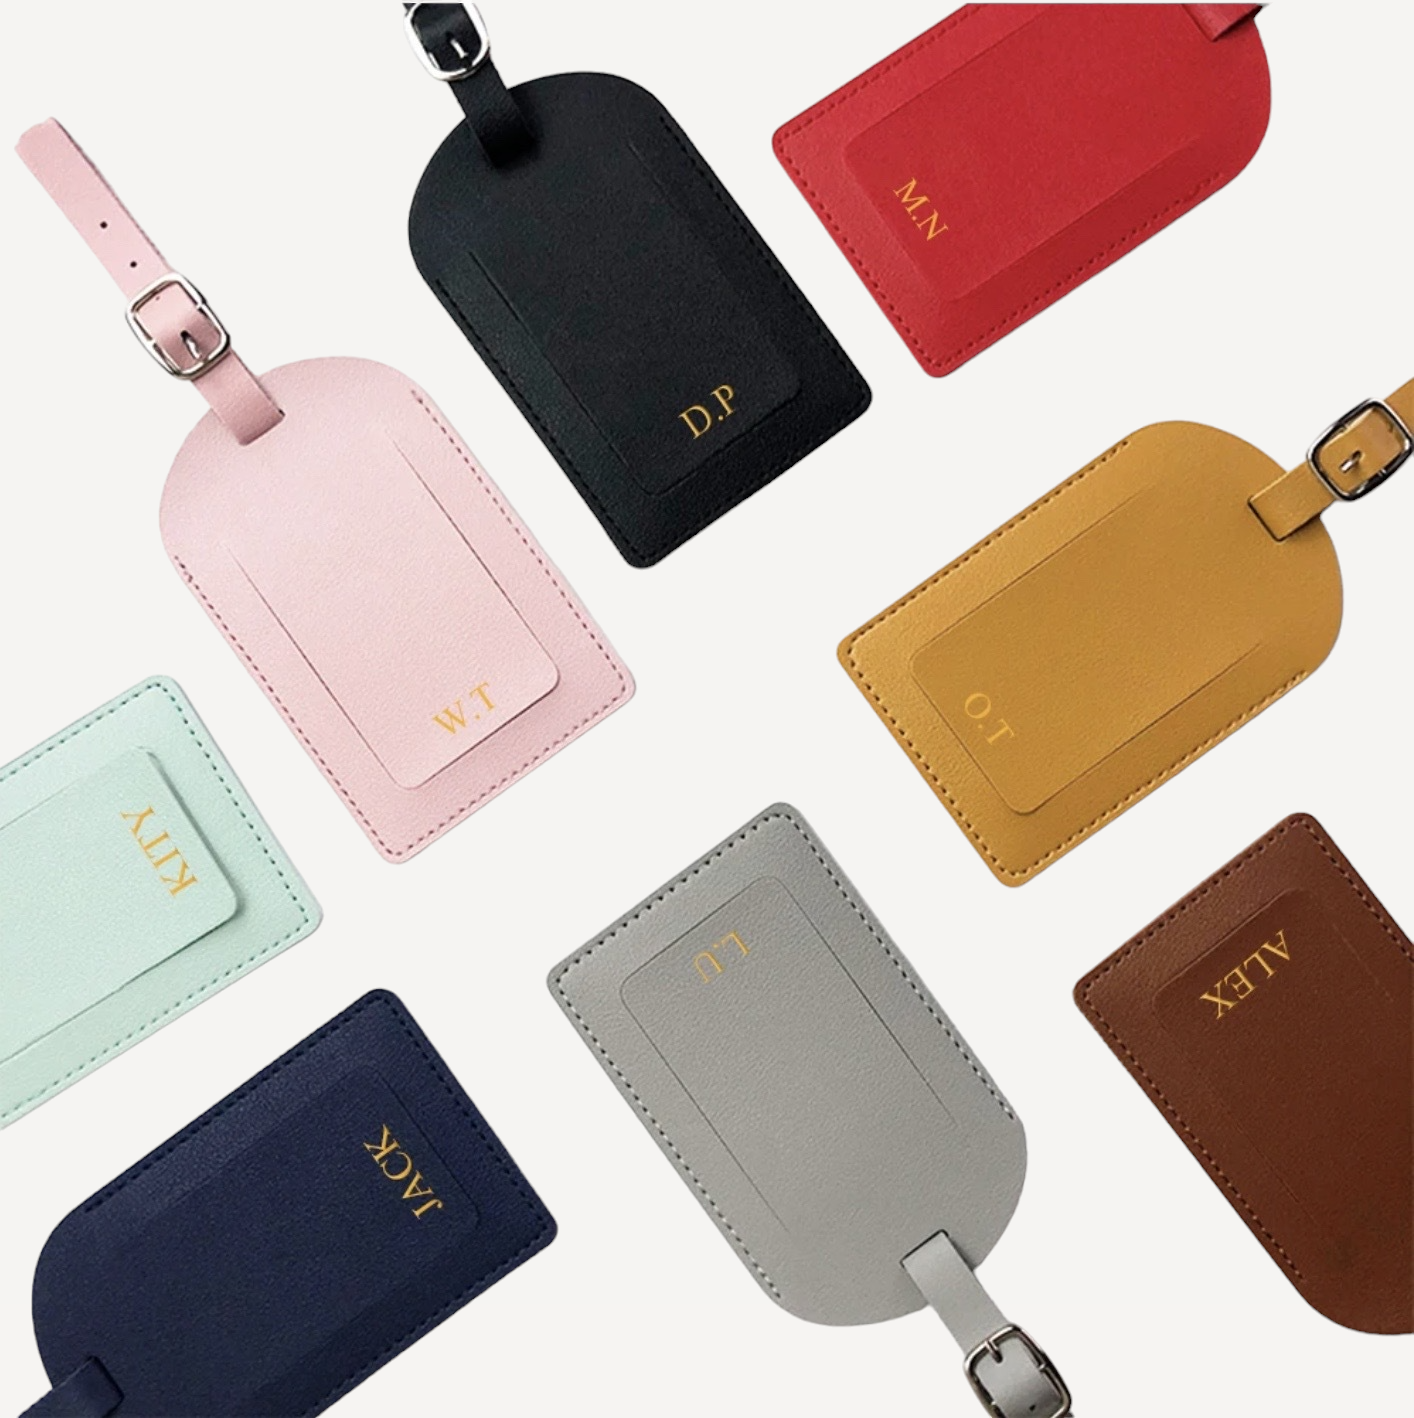 Travel in Style: The Personalized Initials Luggage Tag by Zumadan